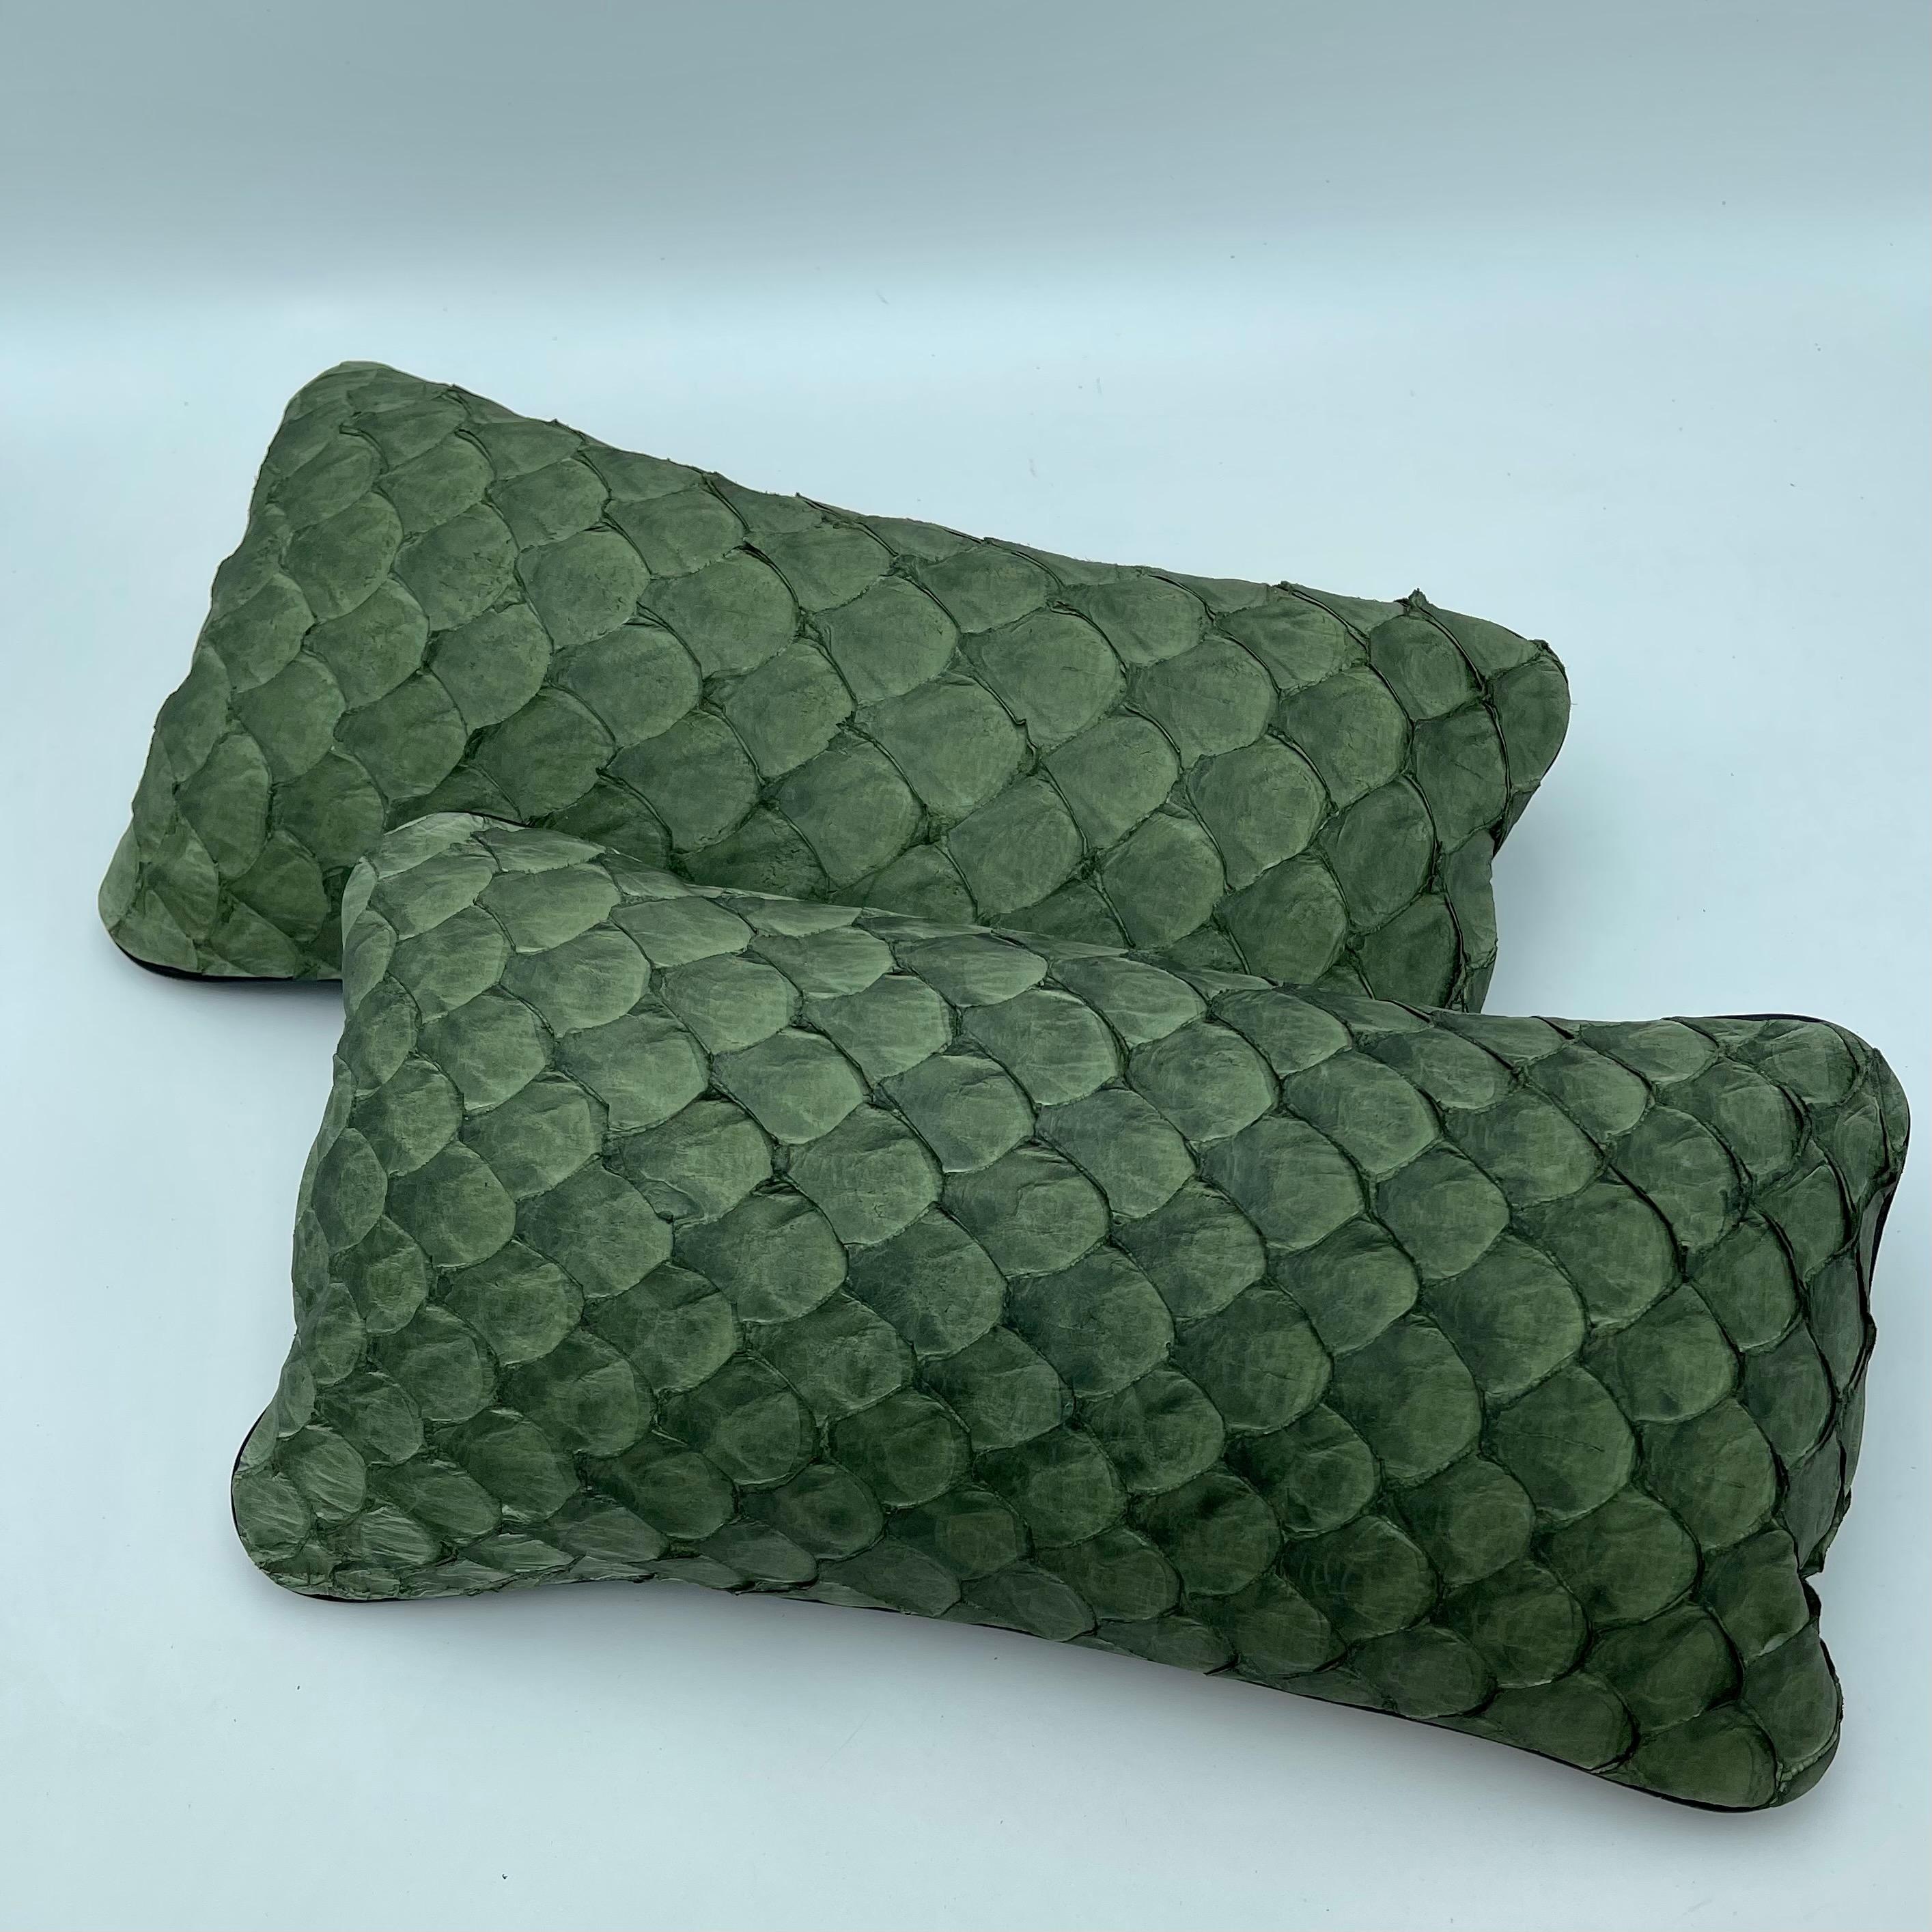 Set of 2 leather cushion, exclusive fish leather green color and black back, small size 15.7 x 7.9 in. Trimmed Scales

Fish leather luxury cushion. The fish skins comes from Brazilian food industry, it is the second largest river fish in the world